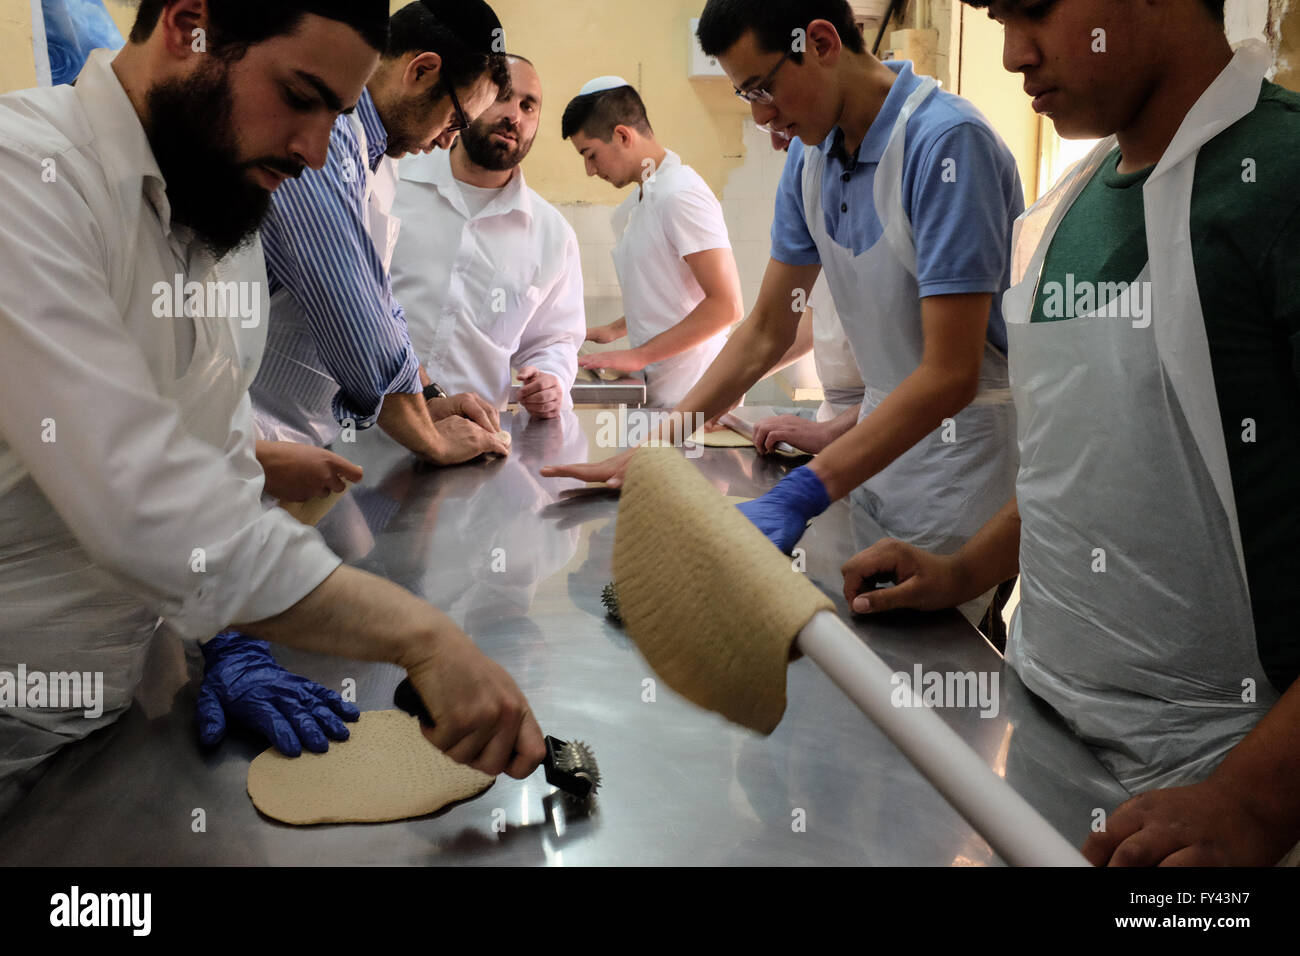 Jerusalem, Israel. 21st April, 2016. Jewish men prepare matzah, unleavened bread, for Passover, symbolic of the biblical exodus of the ancient Hebrews from slavery in Egypt to freedom, in which not having had time to wait for dough to rise before leaving Egypt, they journeyed into the desert with unleavened bread. Credit:  Nir Alon/Alamy Live News Stock Photo